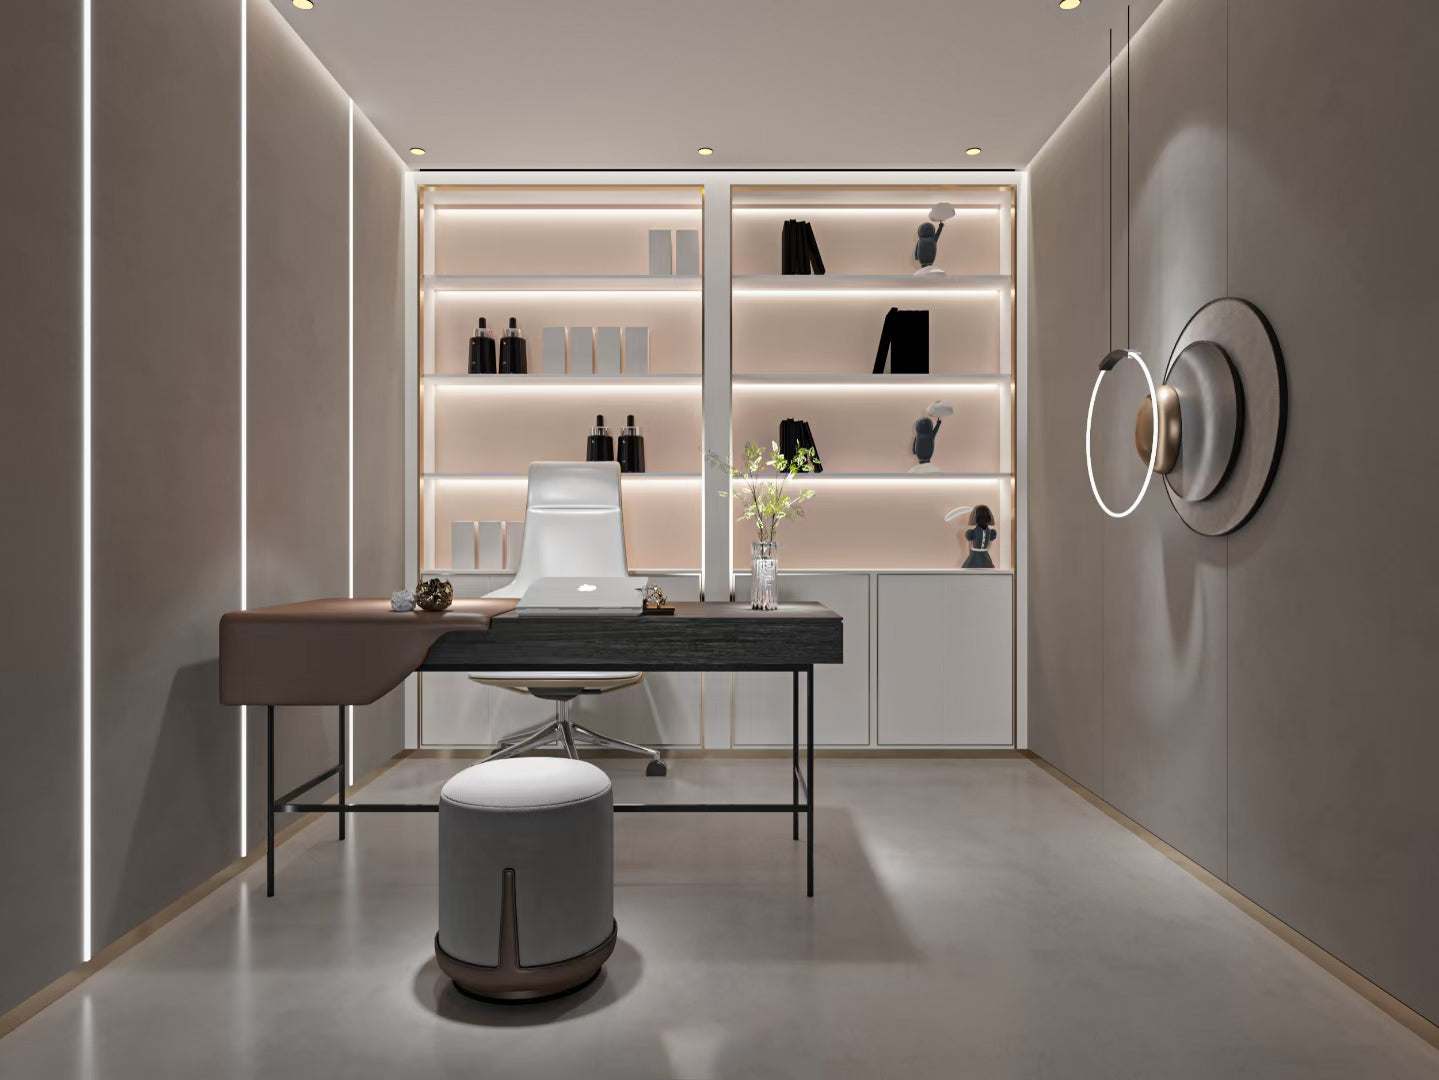 Beauty meets Functionality: Designing a Practical yet Stylish Salon Interior